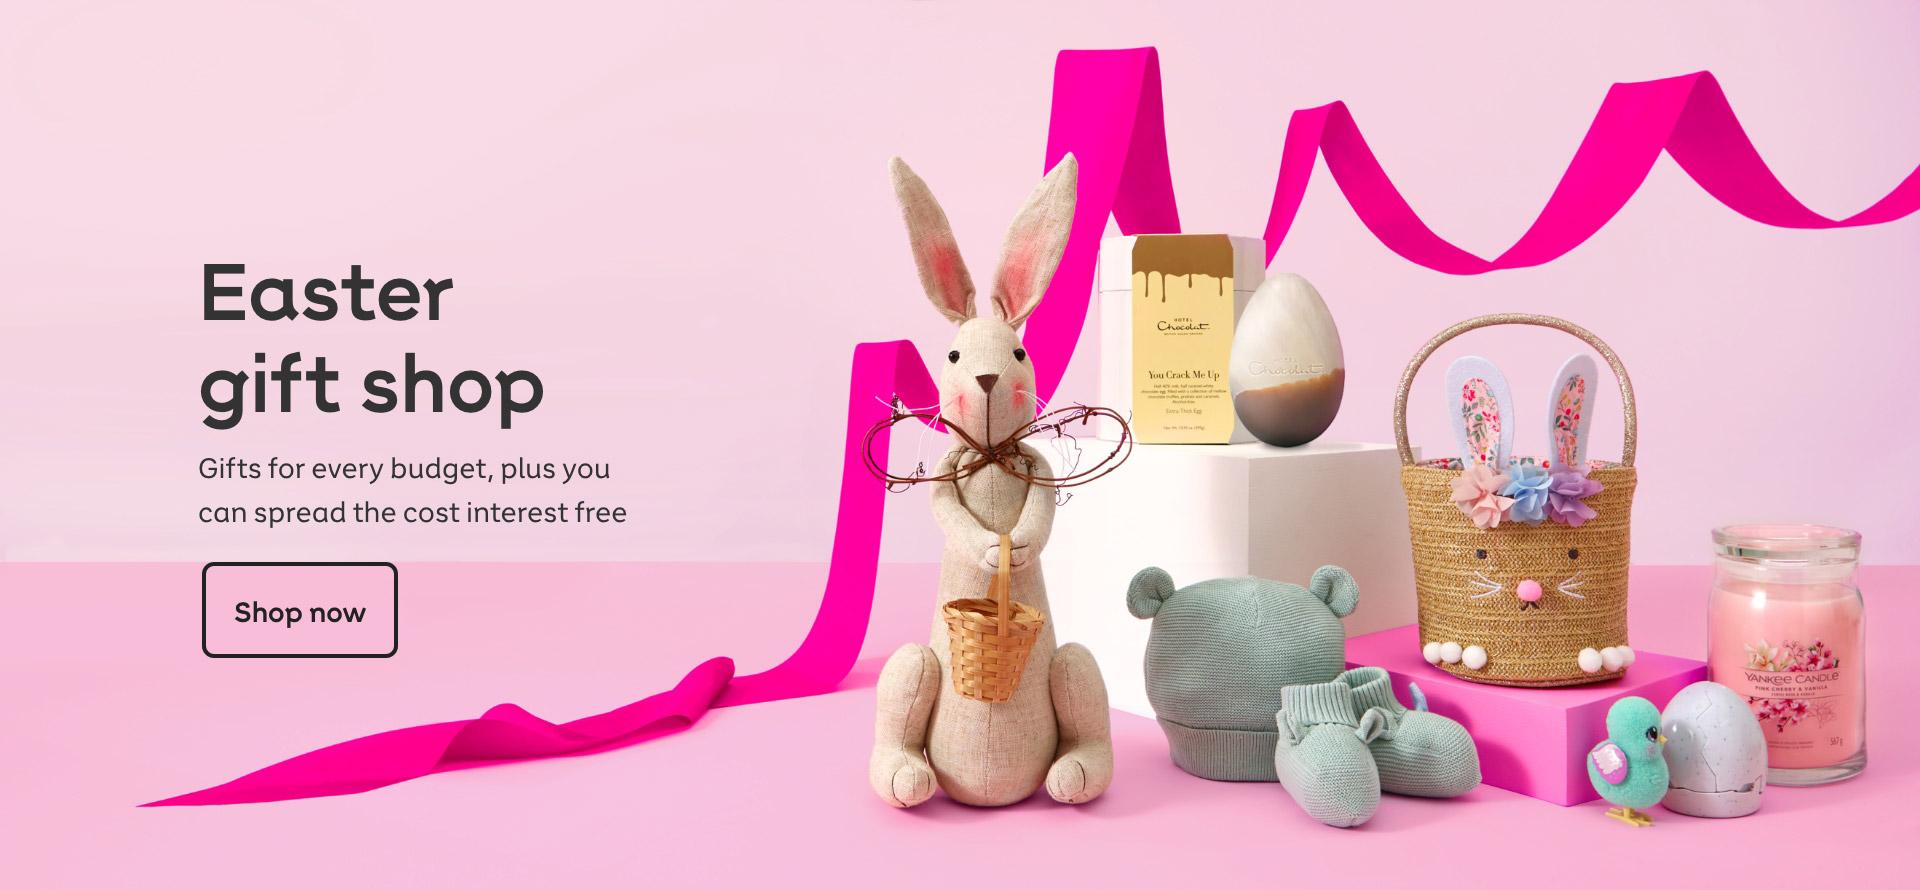 Easter gift shop. Gifts for every budget, plus you can spread the cost interest free. Shop now.